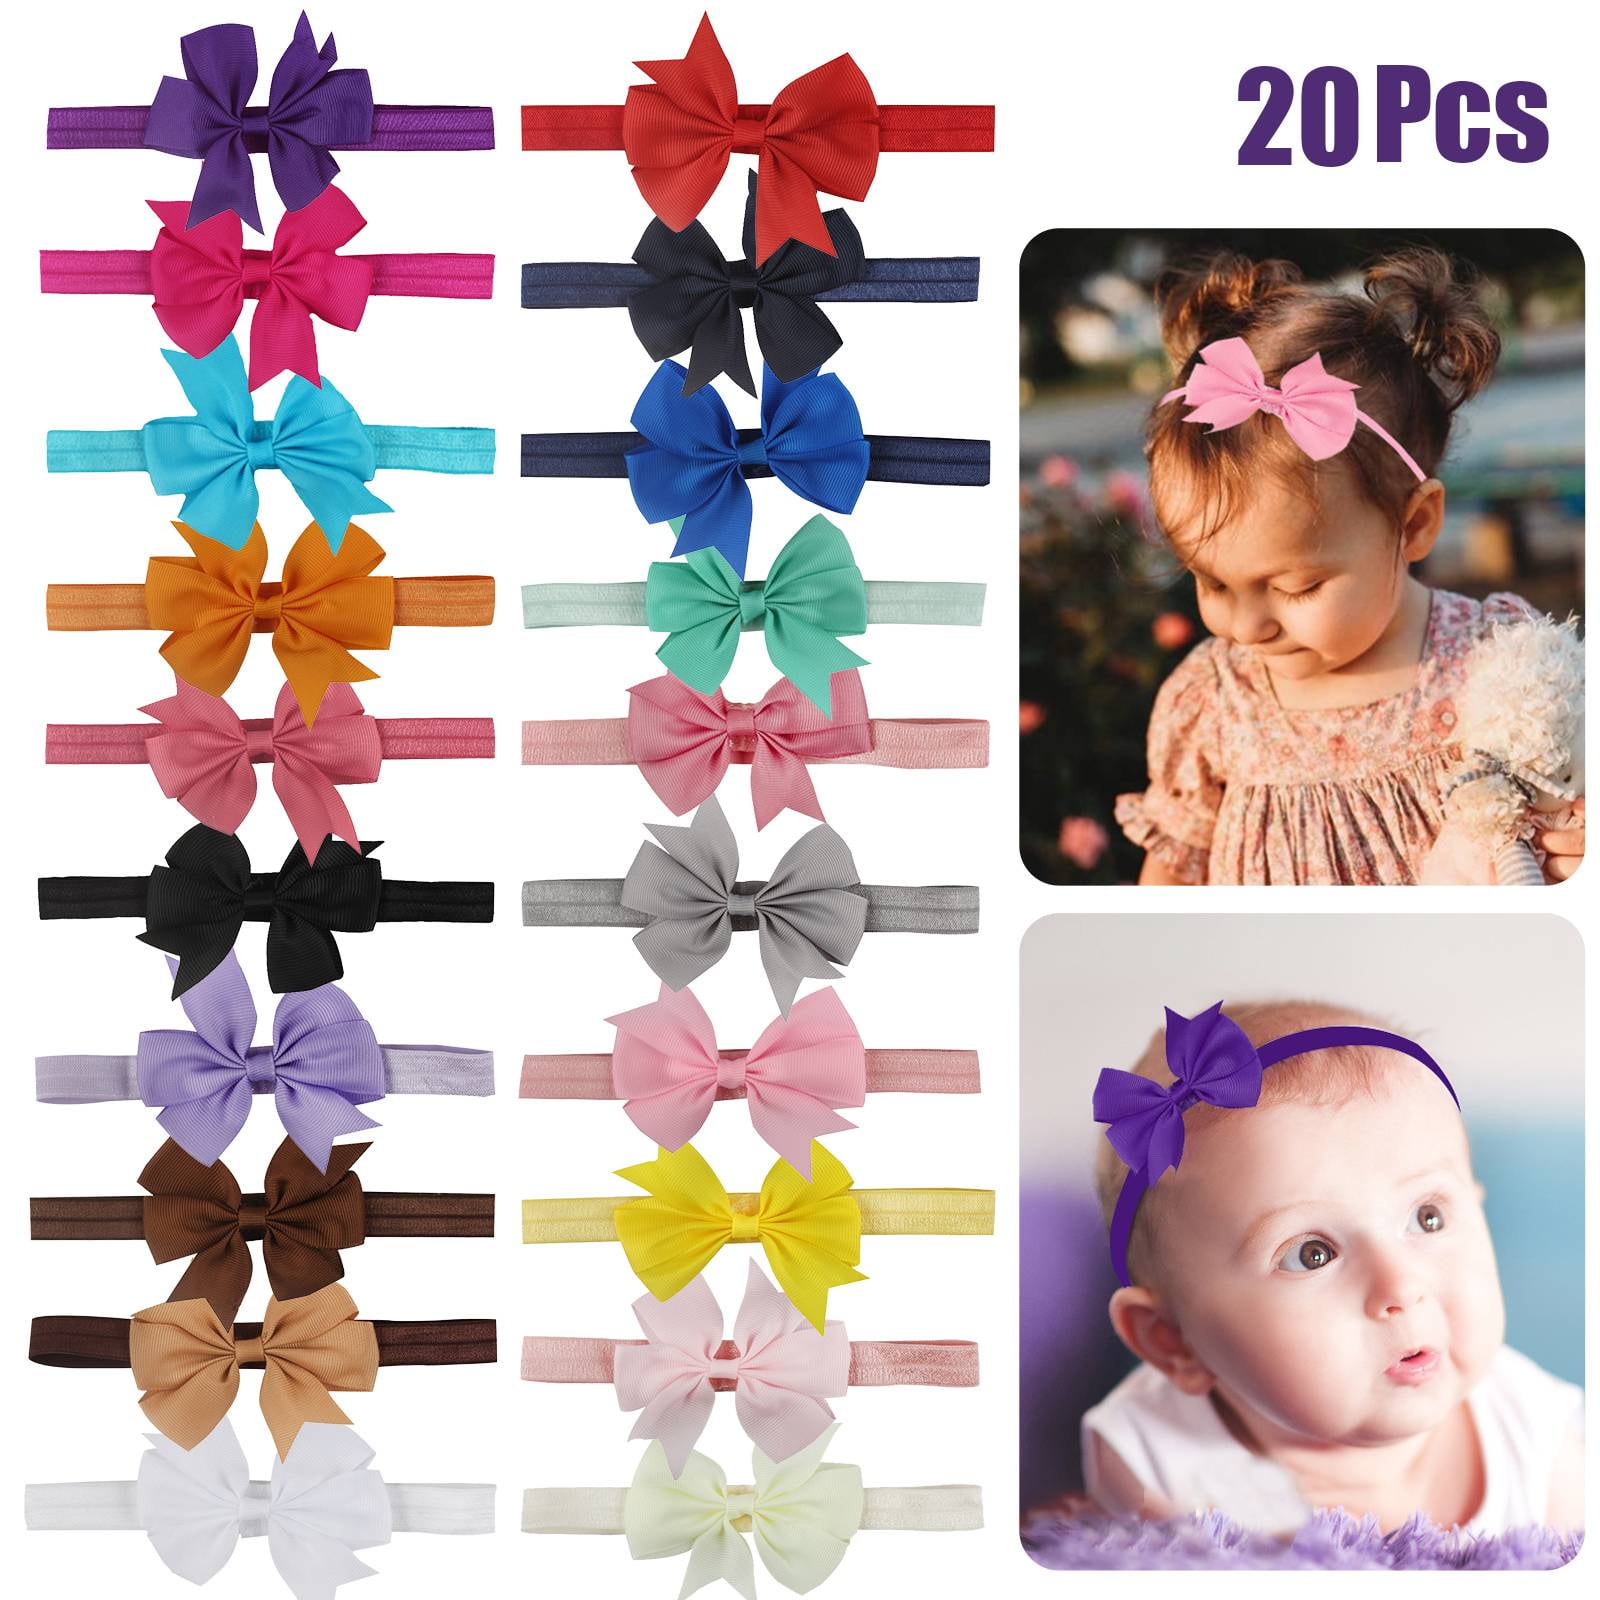 20Pcs Baby Girl Bows Headbands, TSV Newborn Hairband, Infant Turban Knotted  Headband, Soft Stretchy Polyester Elastic Headwraps, Hair Accessories for  Infants Toddler Children Girls Kids 